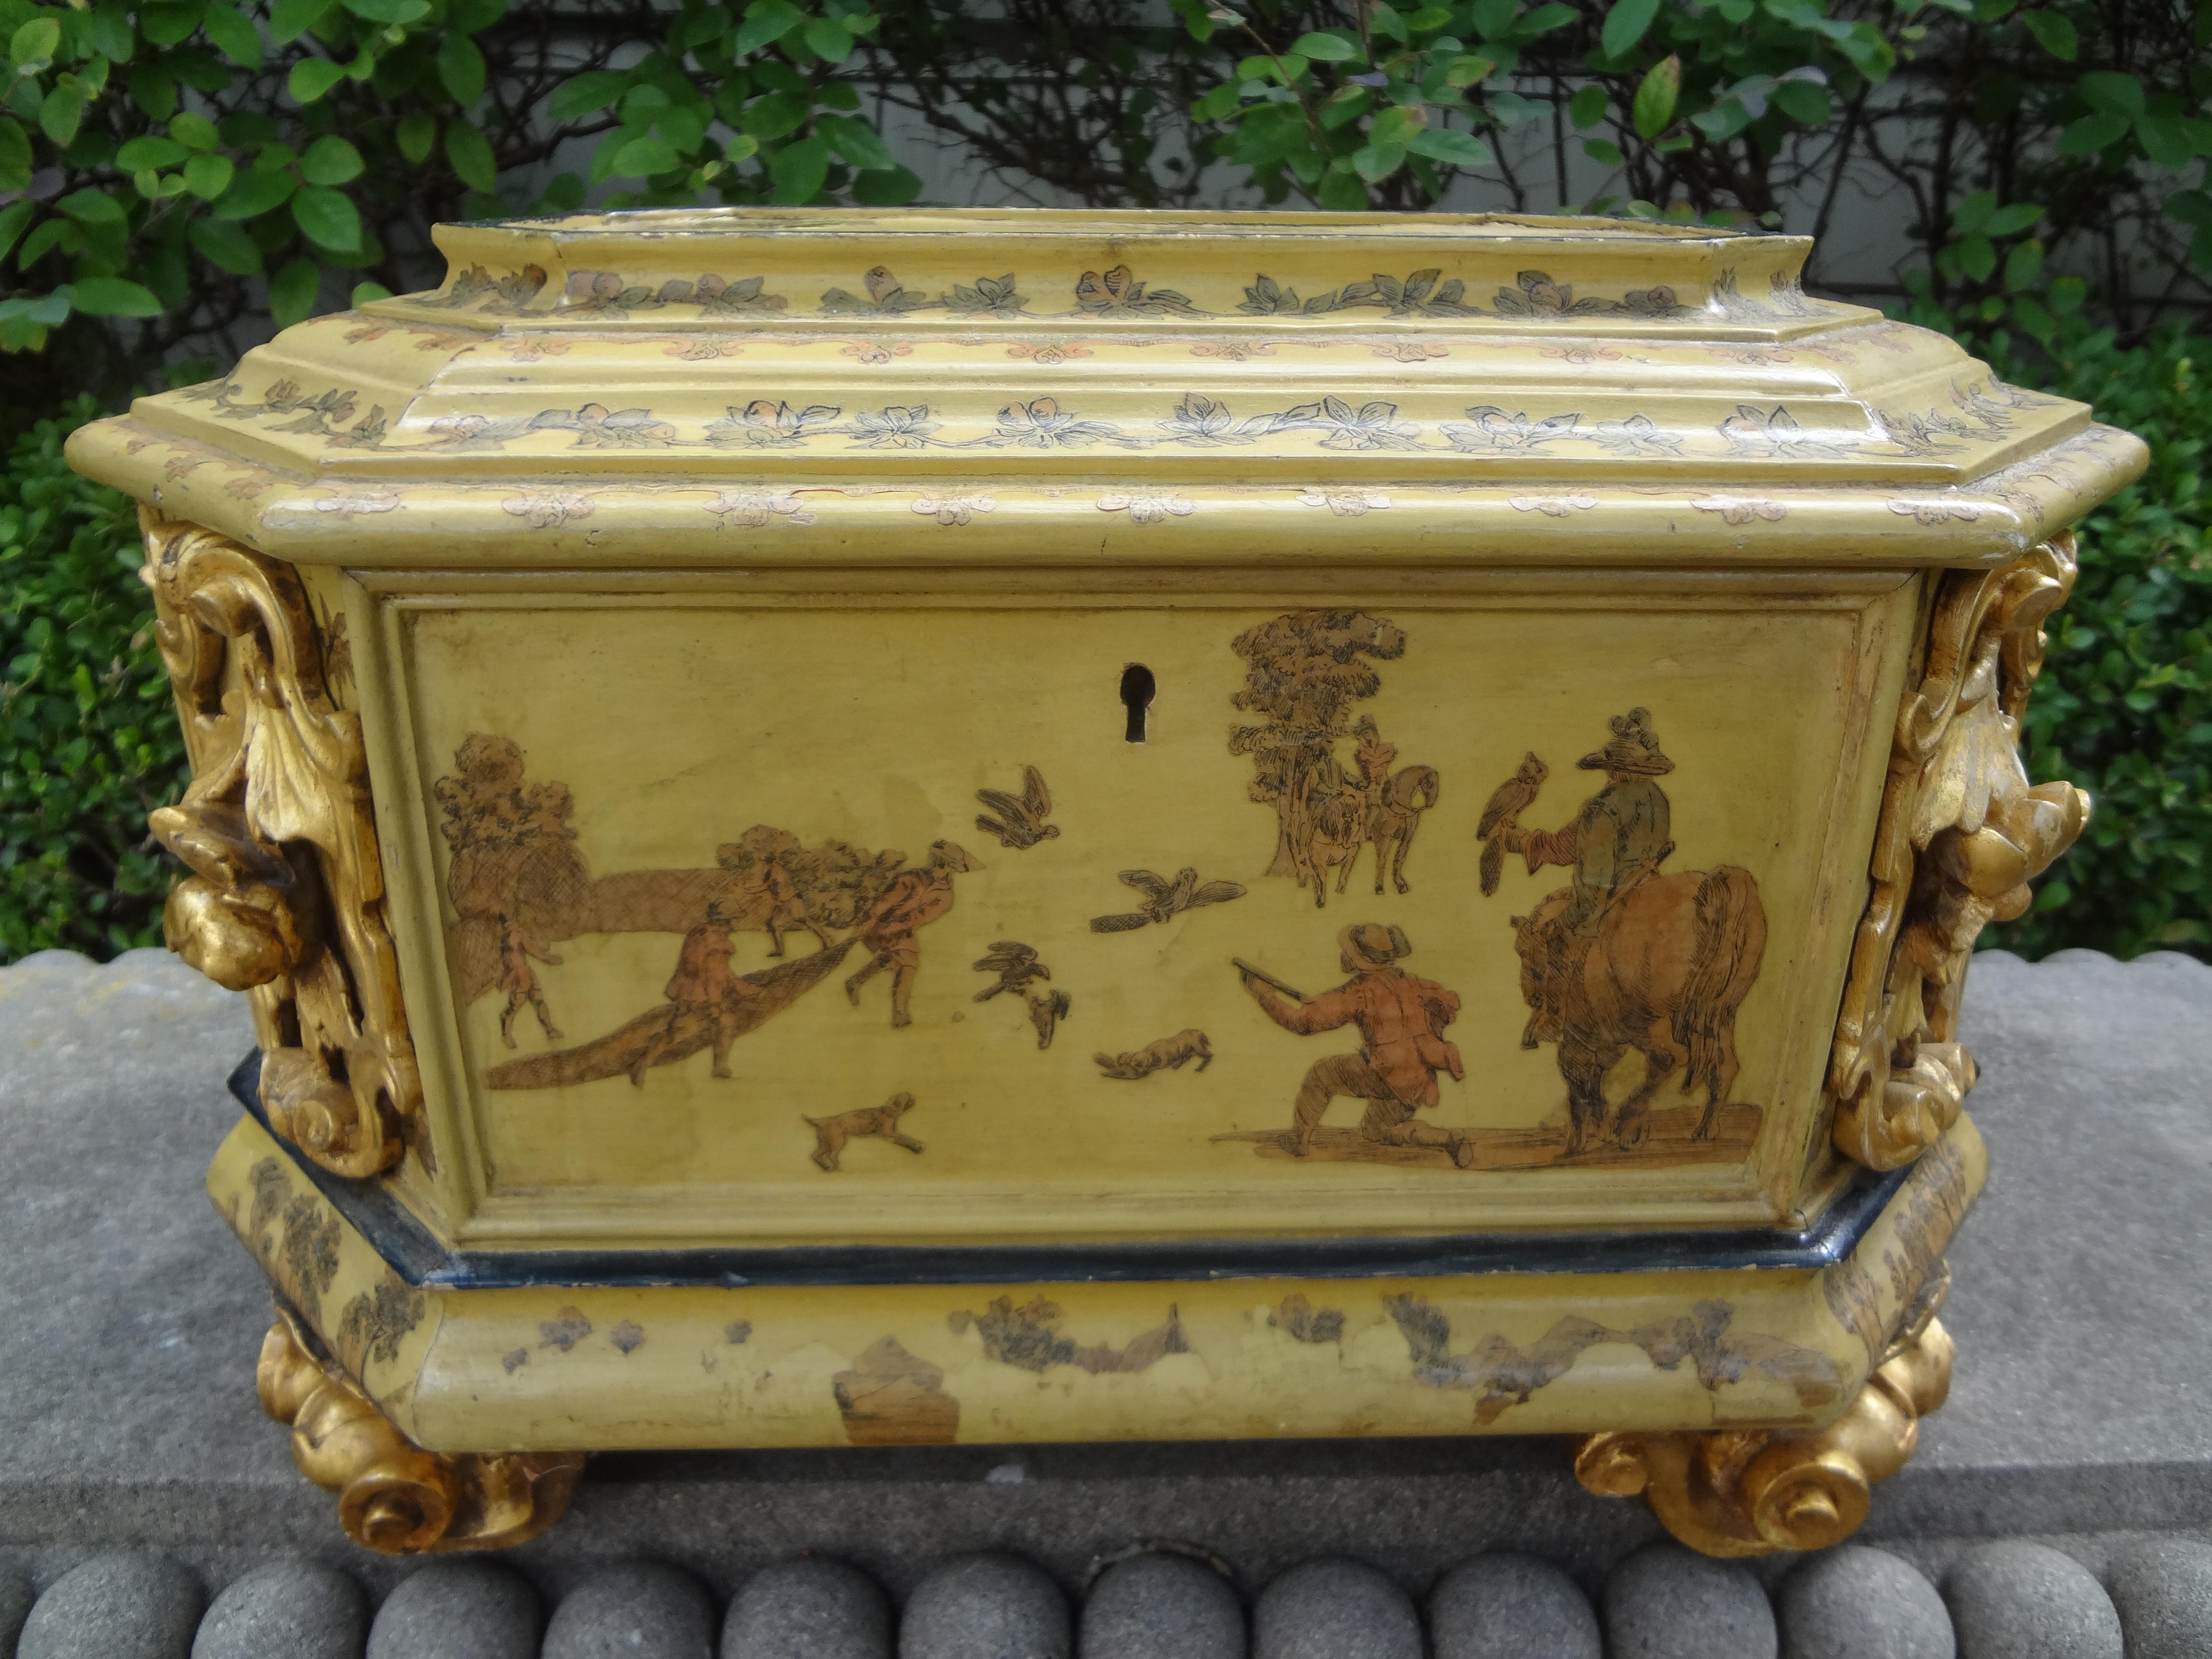 Stunning large scale Italian Baroque style carved wood box with graceful scrolled feet and lion head handles. Our antique Italian box was artistically decorated with pen and ink on all sides. This lovely hand decorated decorative box would make a